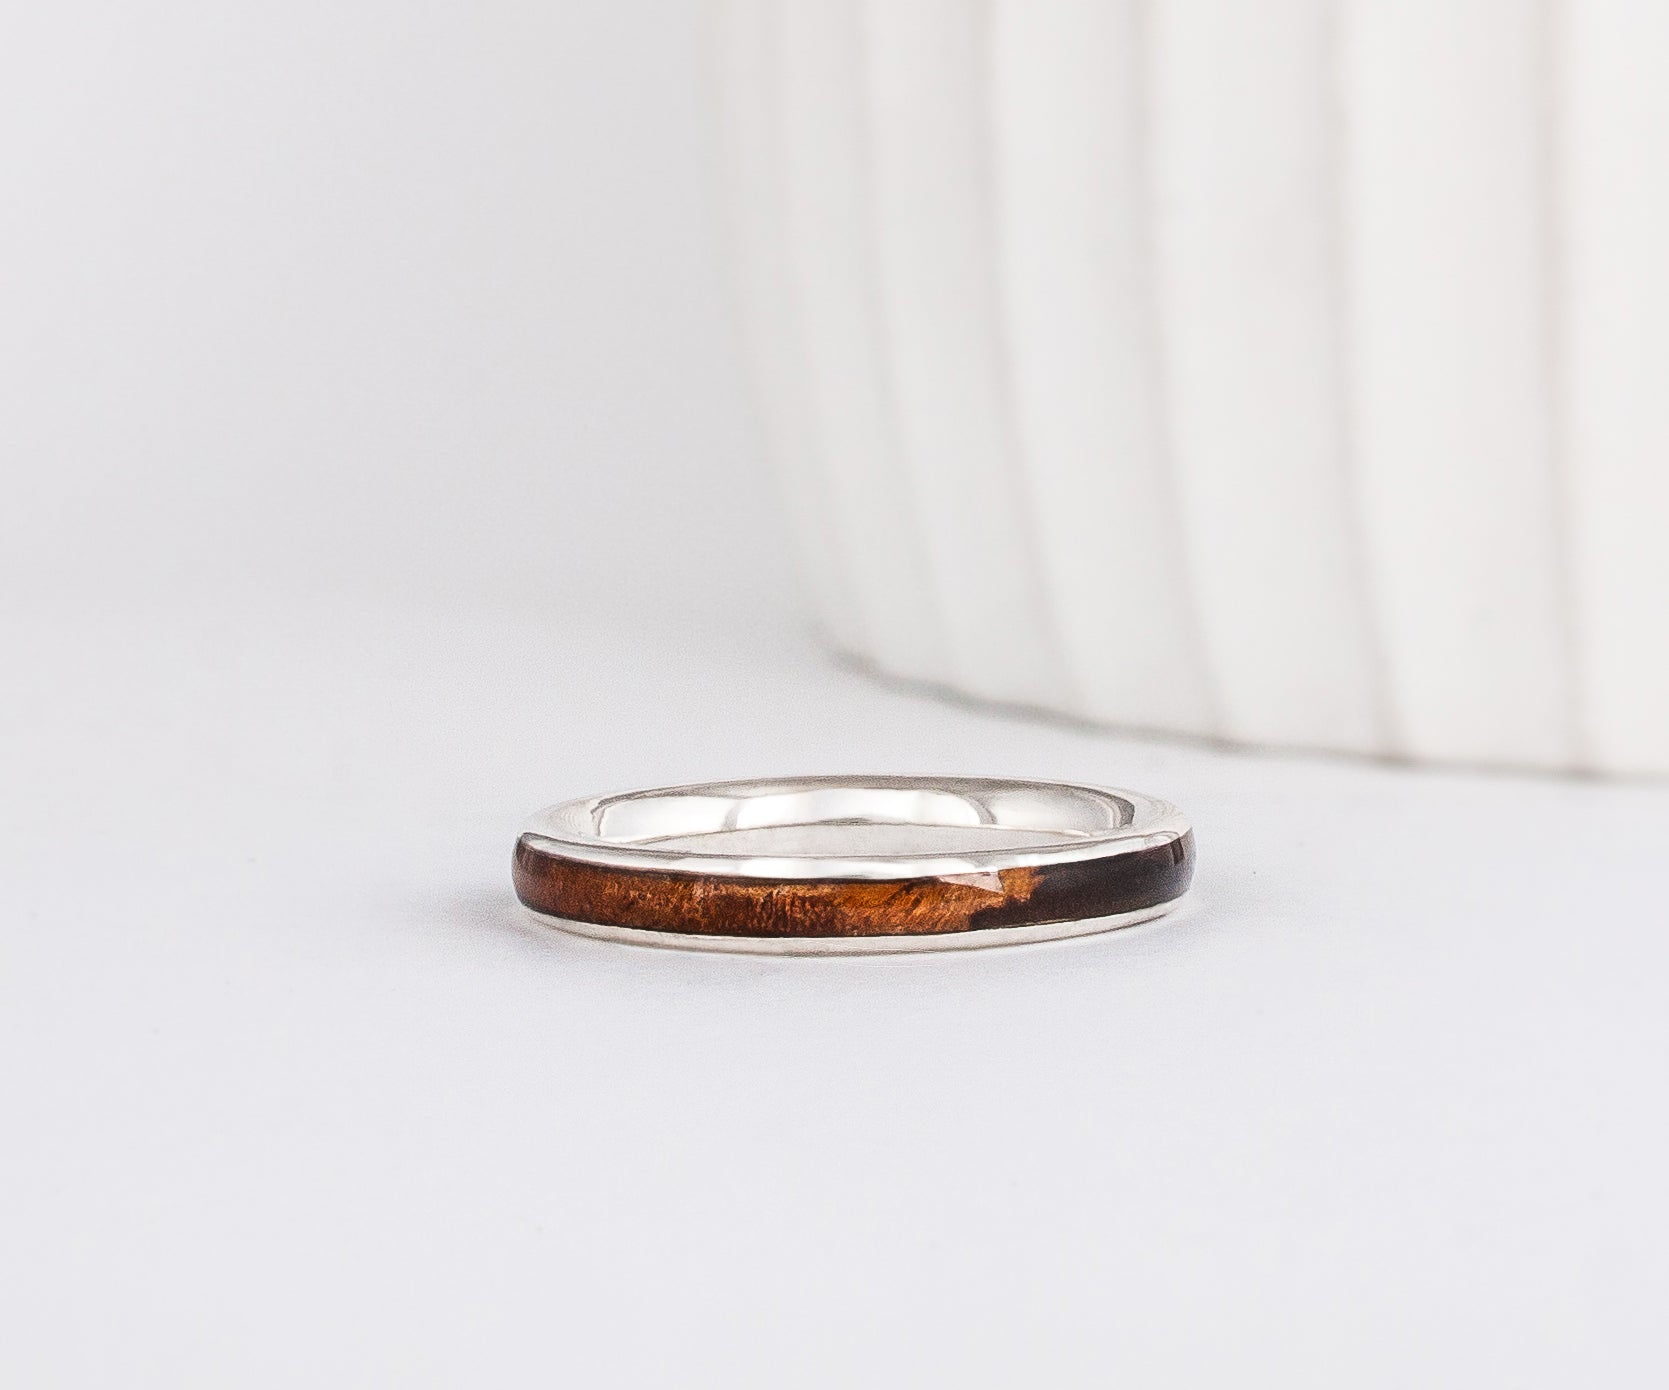 a slim, rounded white gold wedding band with a center inlay of walnut burl wood, giving it a tone on tone look